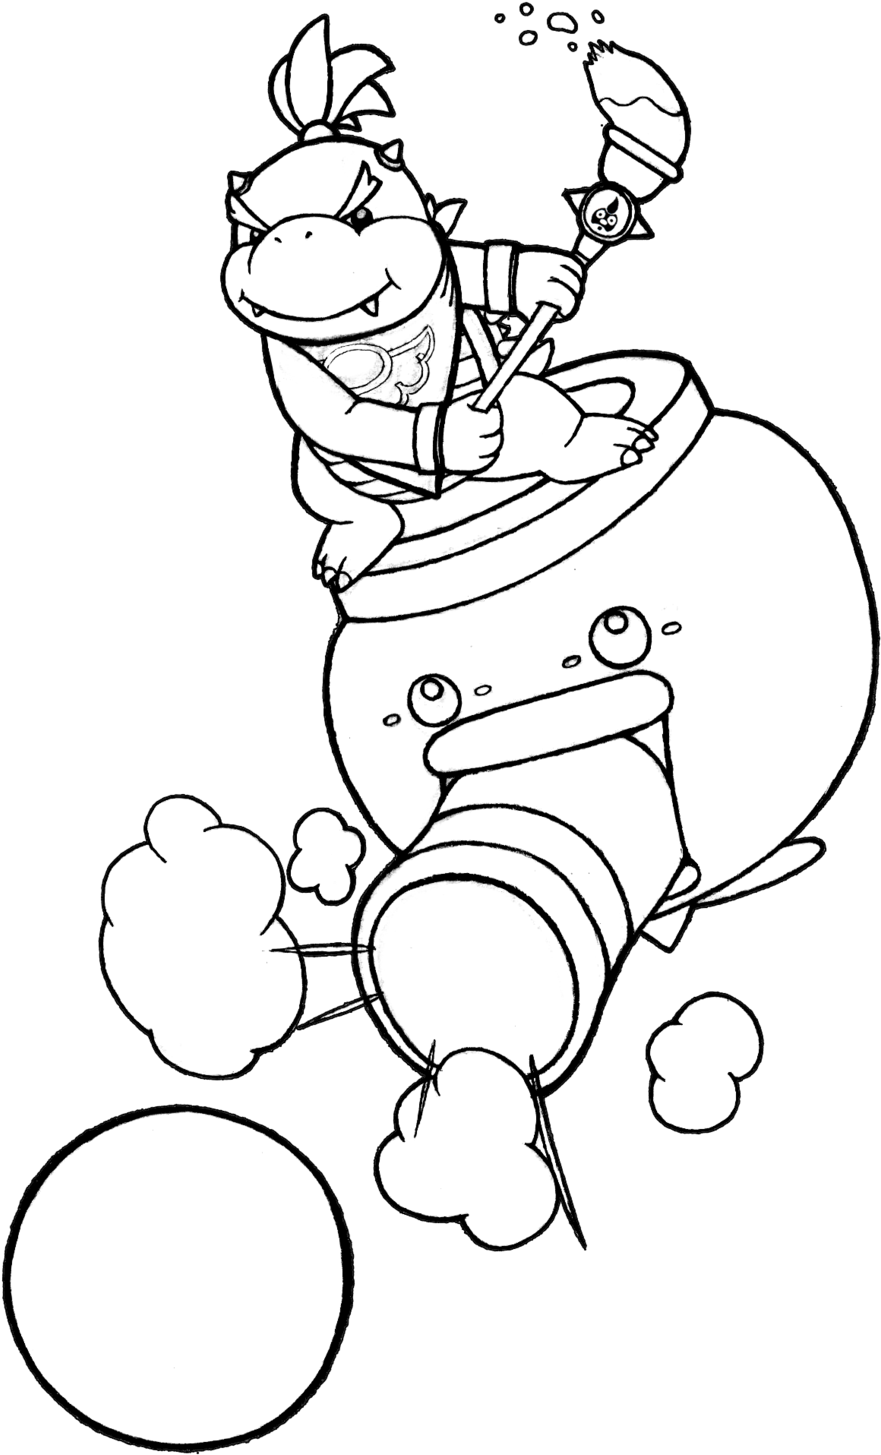 Clown In The Bowser Jr Coloring Pages - Coloring Pages Bowser Jr With His Clown Car (1024x1566)